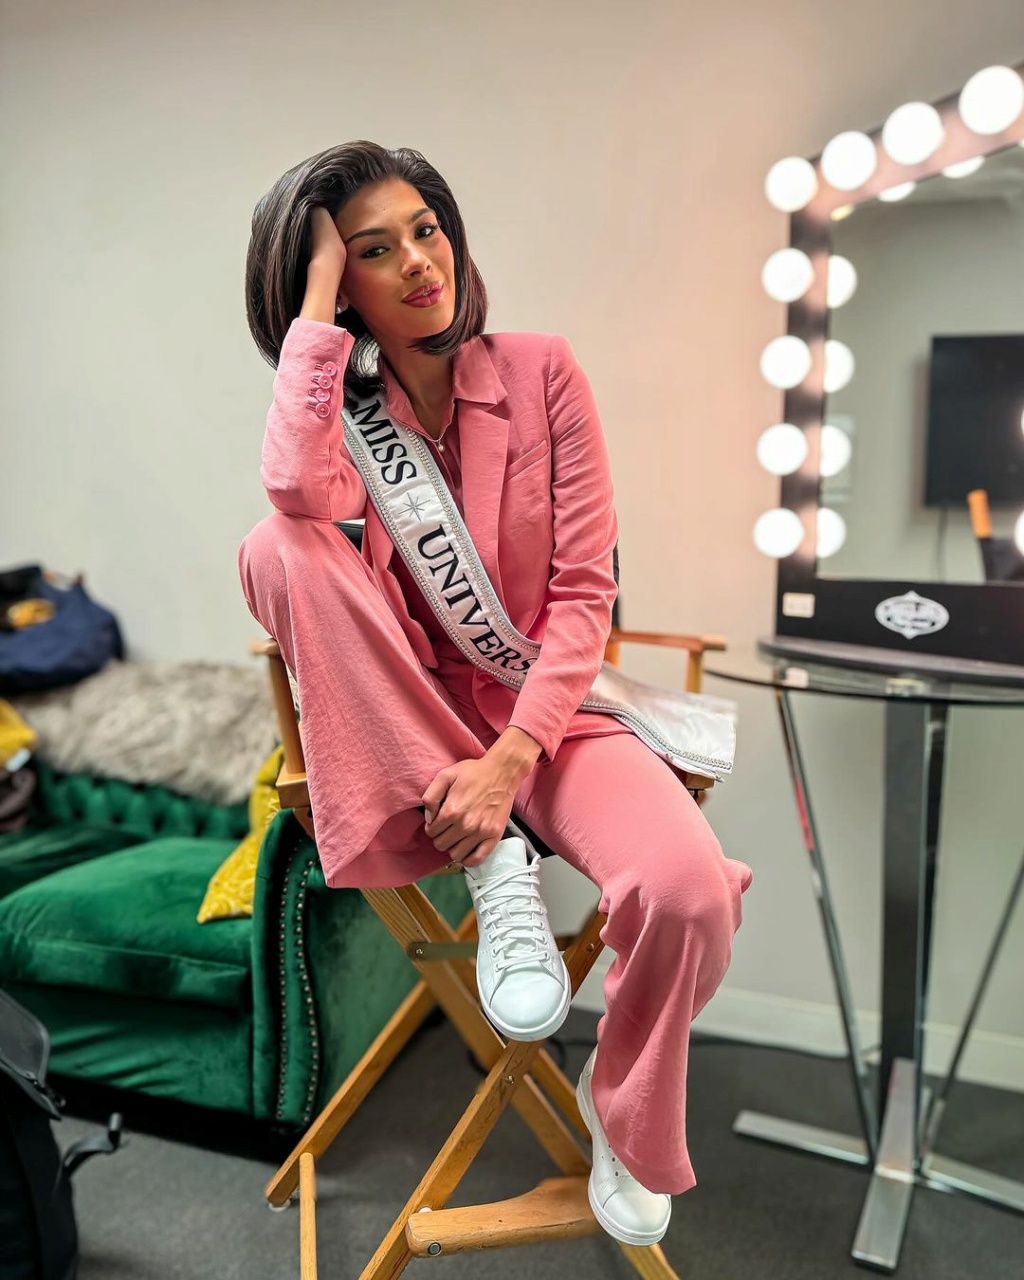 ♔ The Official Thread Of Miss Universe 2023 ® Sheynnis Palacios of NICARAGUA ♔  - Page 4 41957411